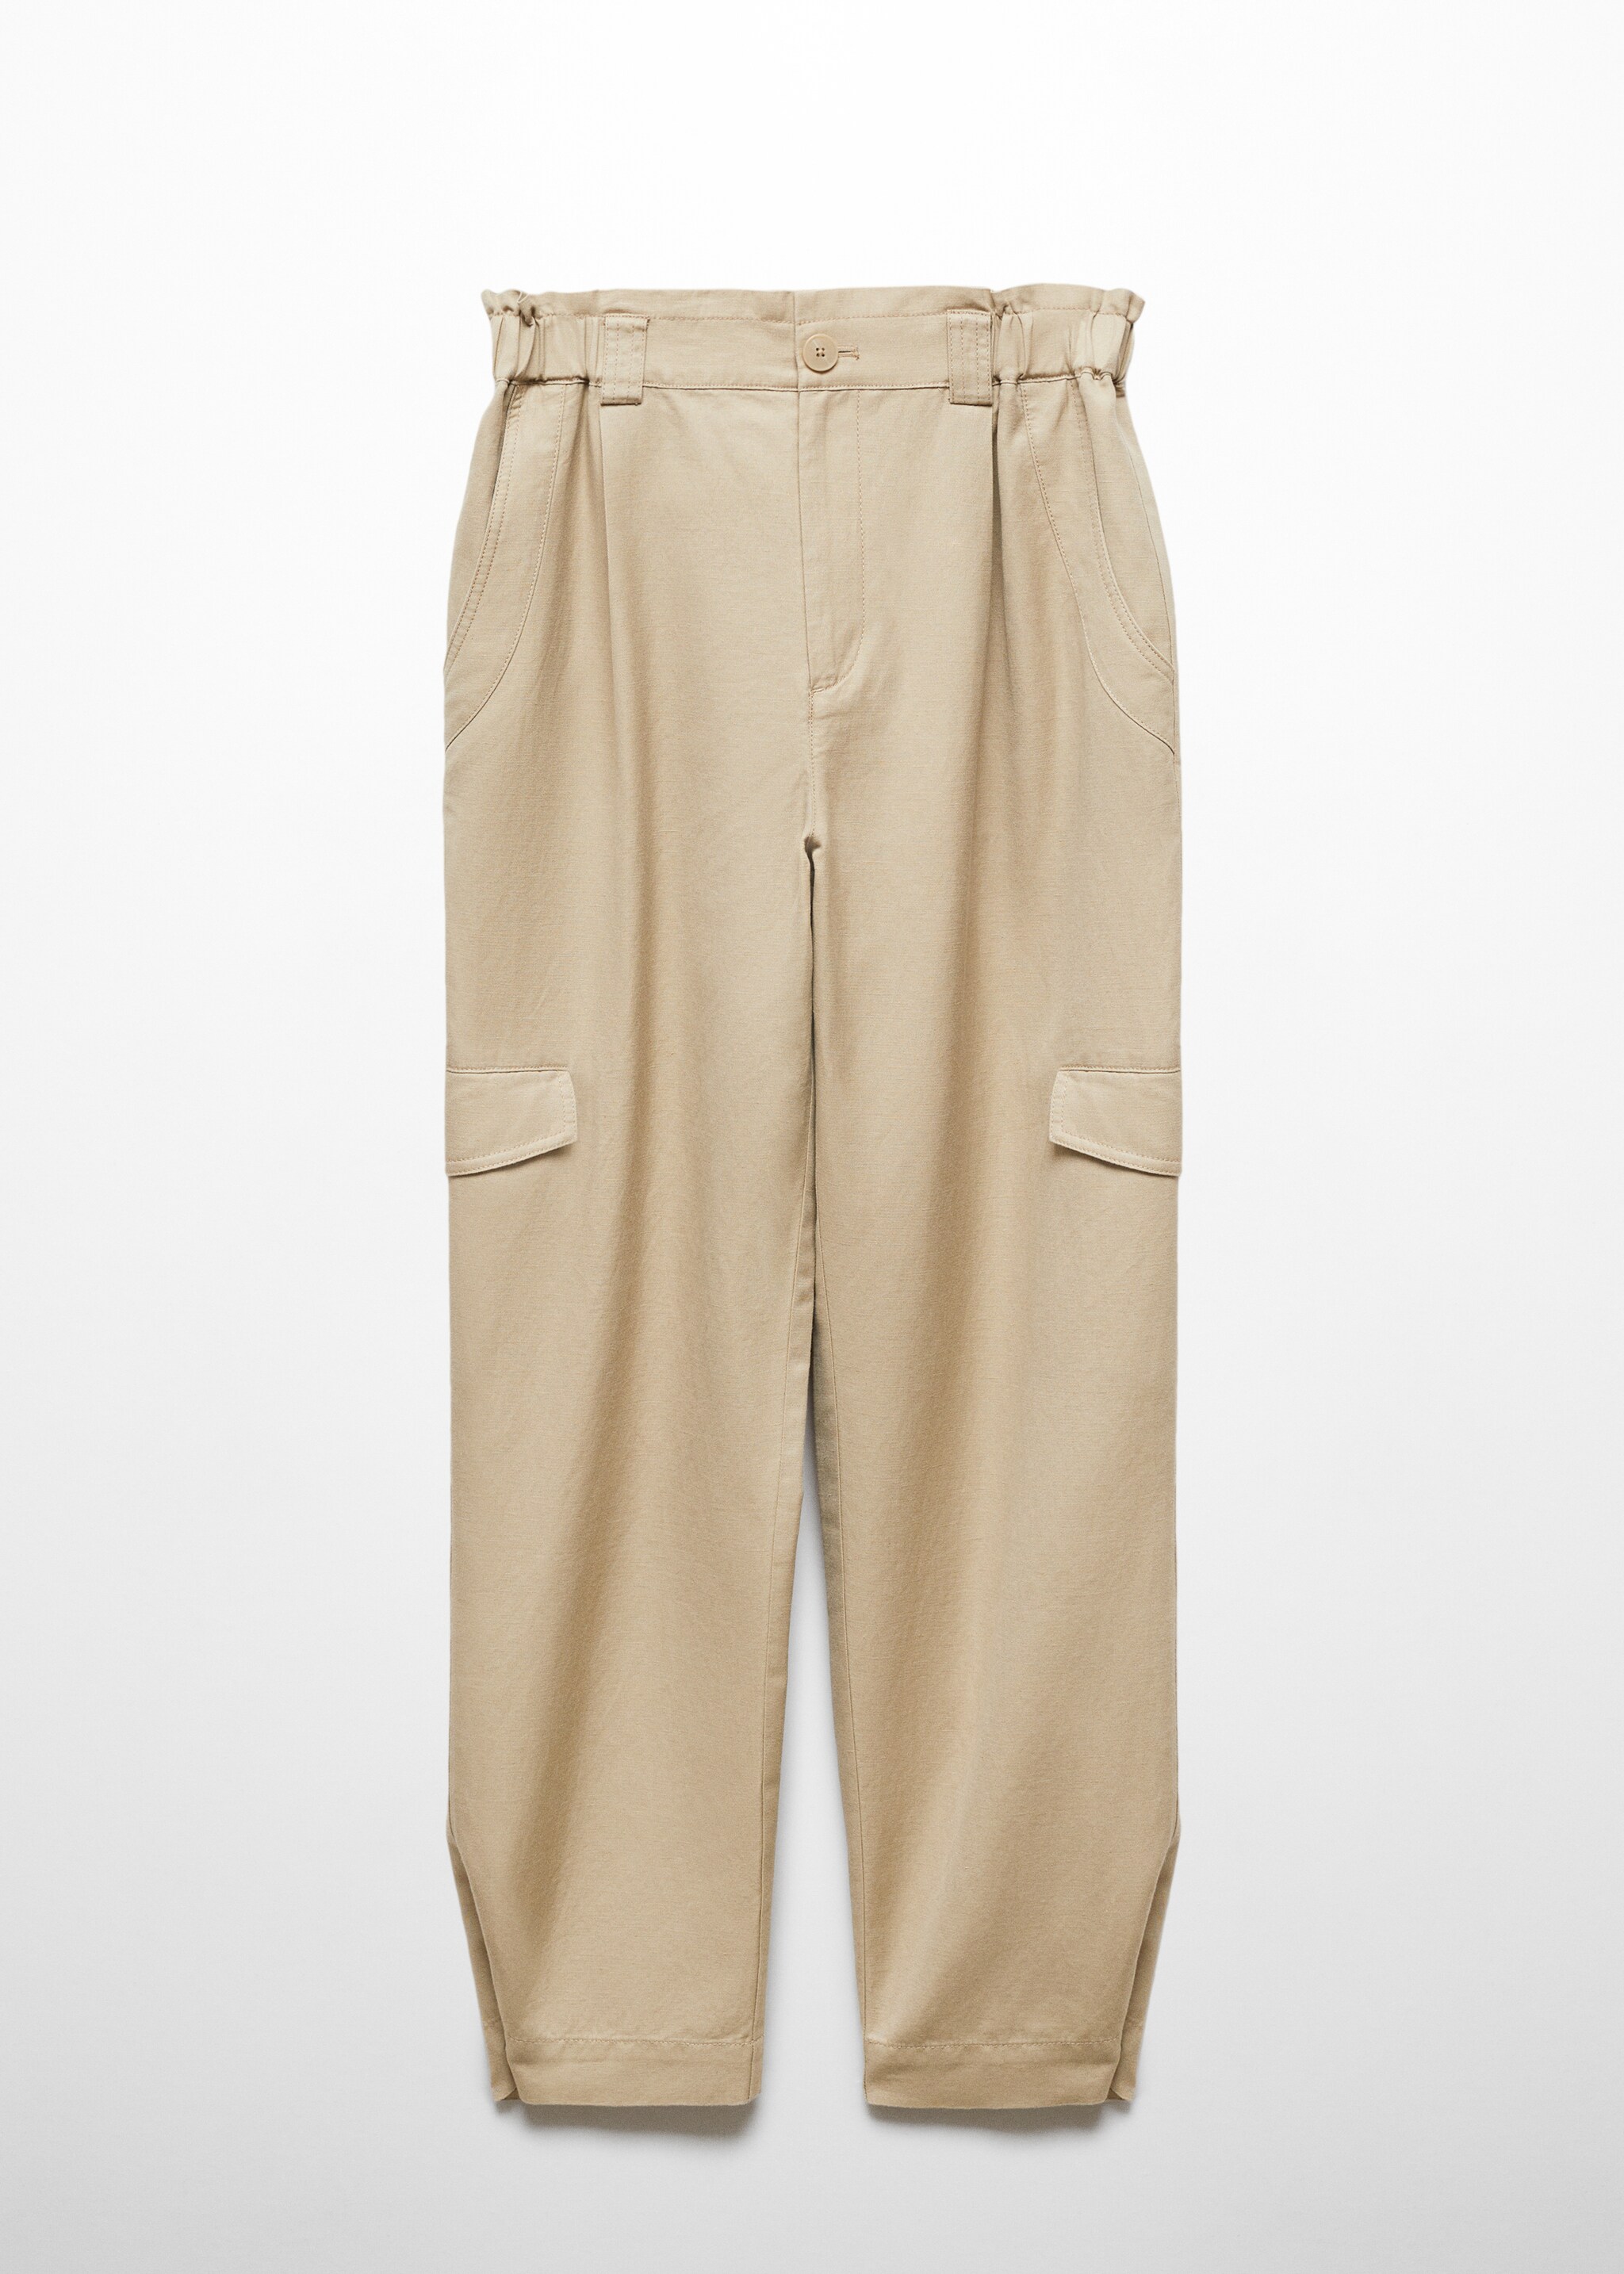 Linen cargo pants - Article without model